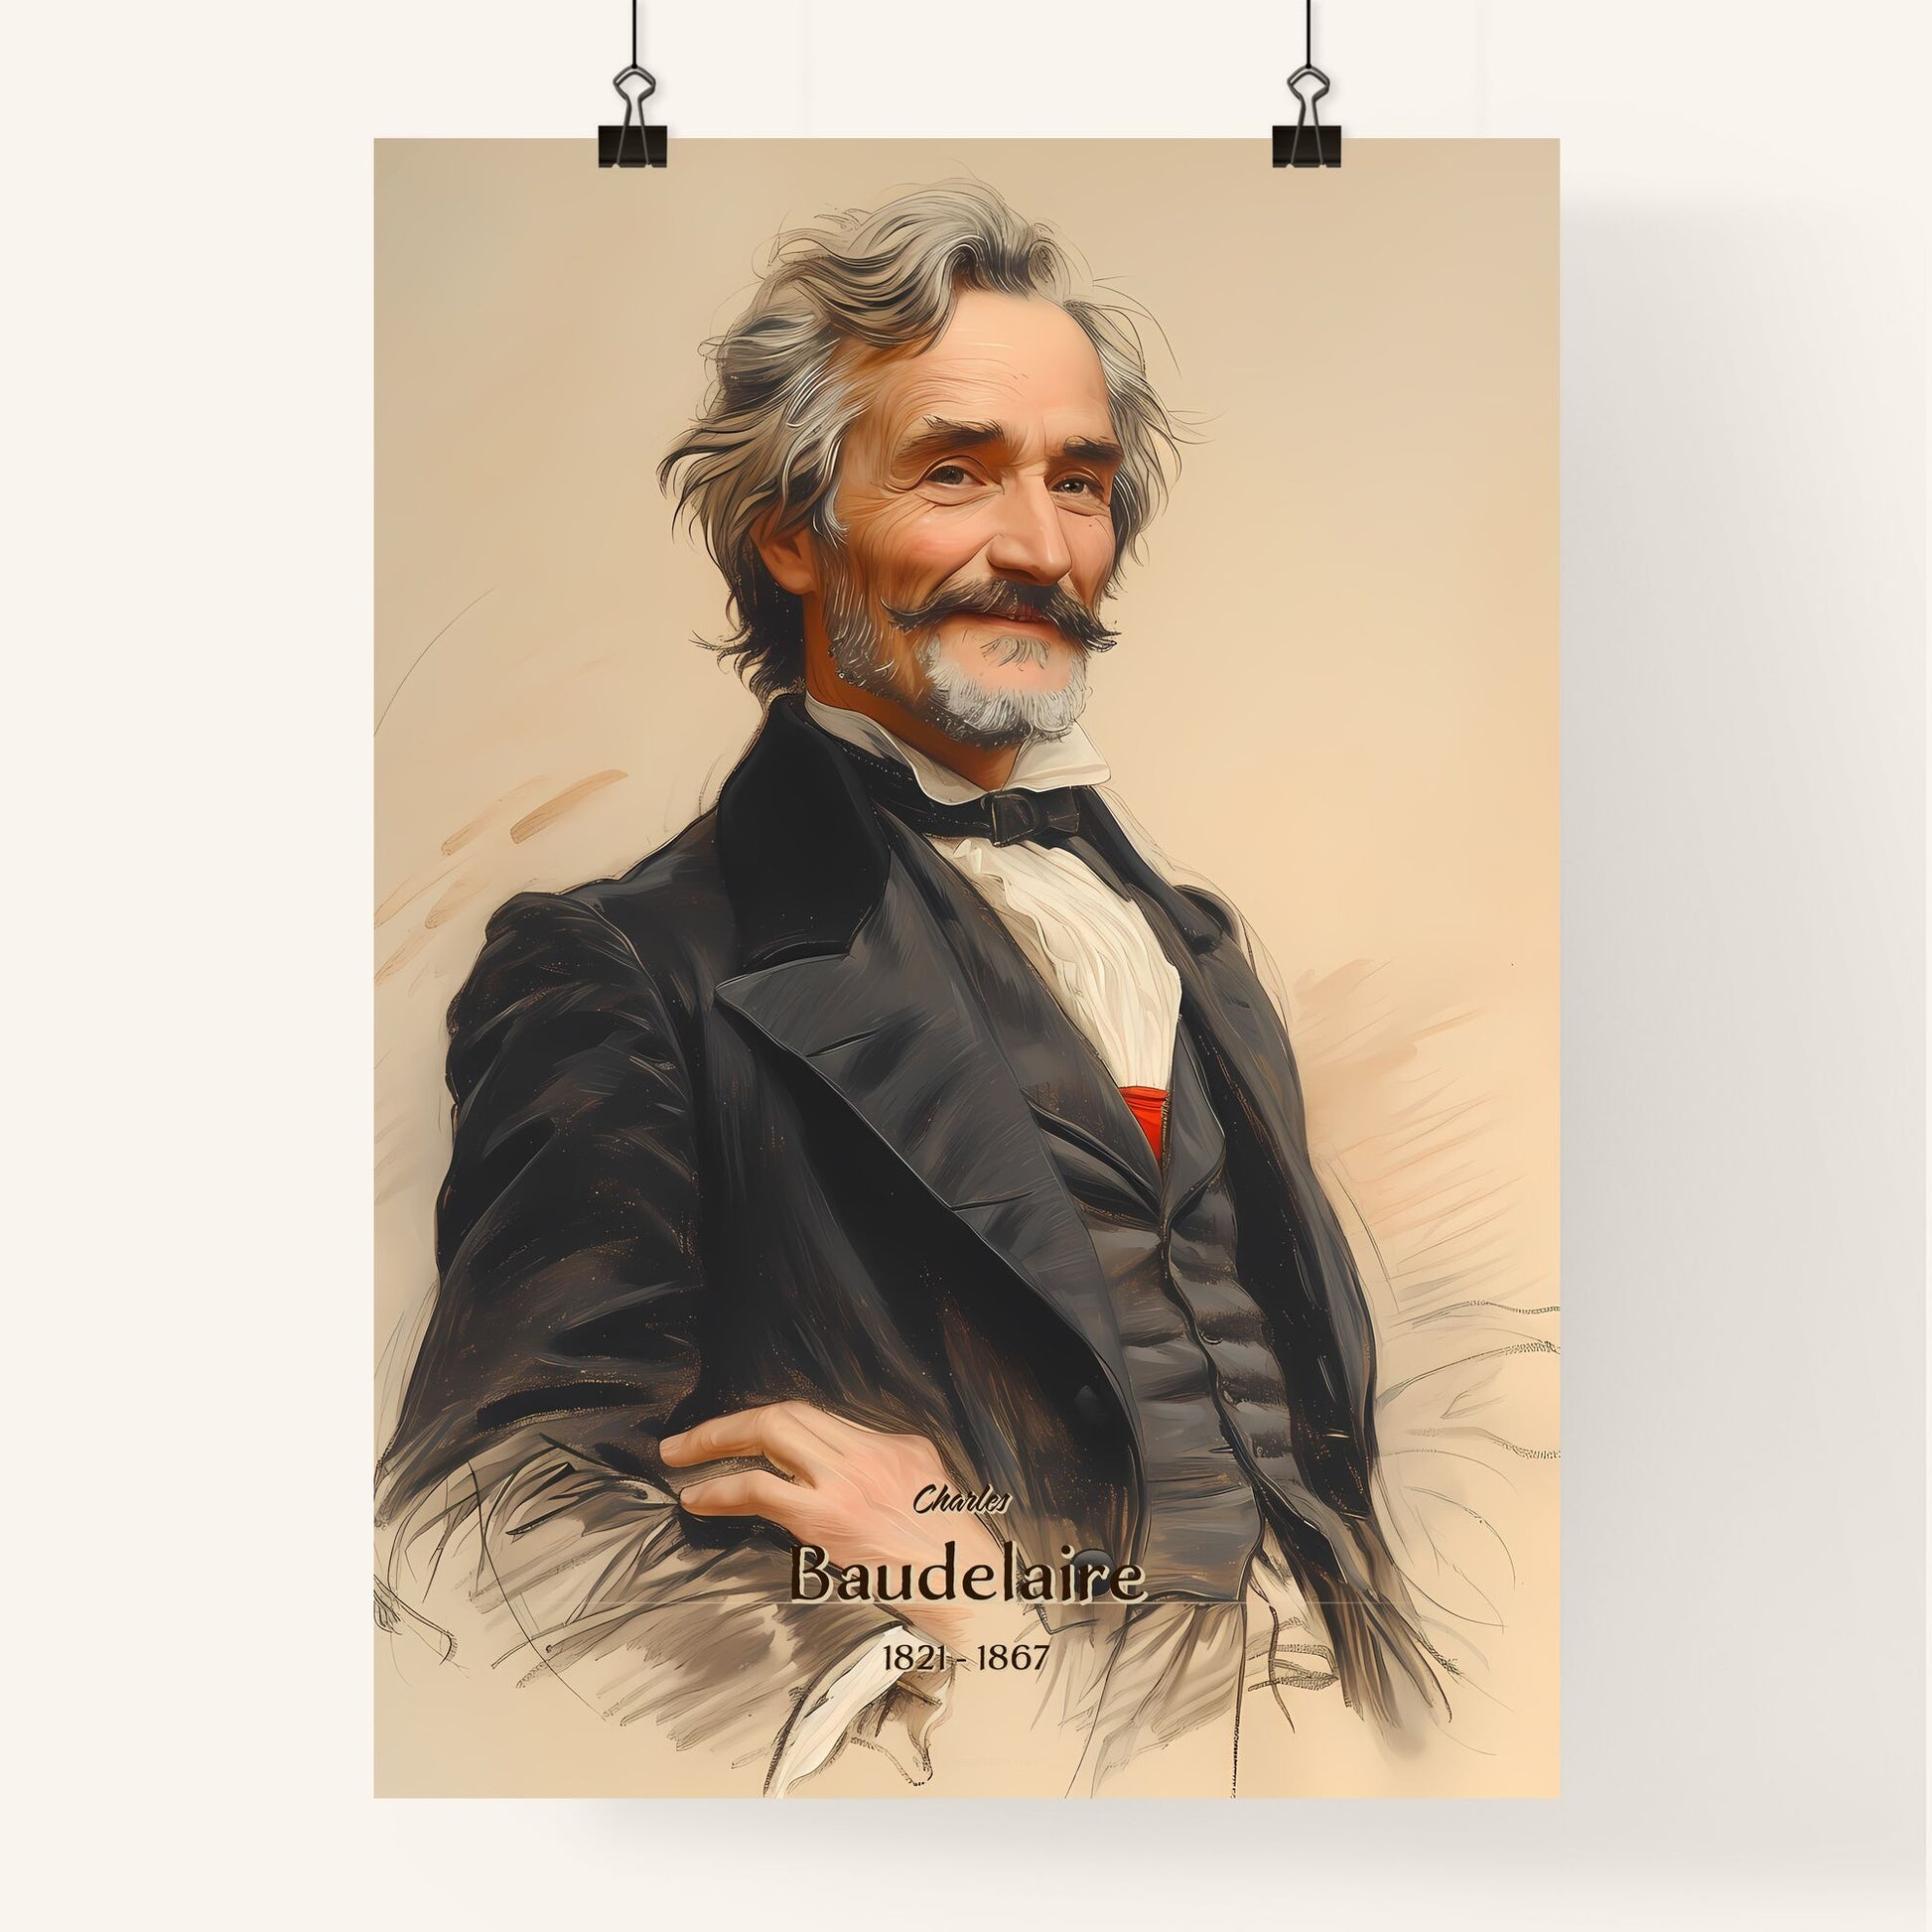 Charles, Baudelaire, 1821 - 1867, A Poster of a man with a mustache and a beard wearing a suit Default Title